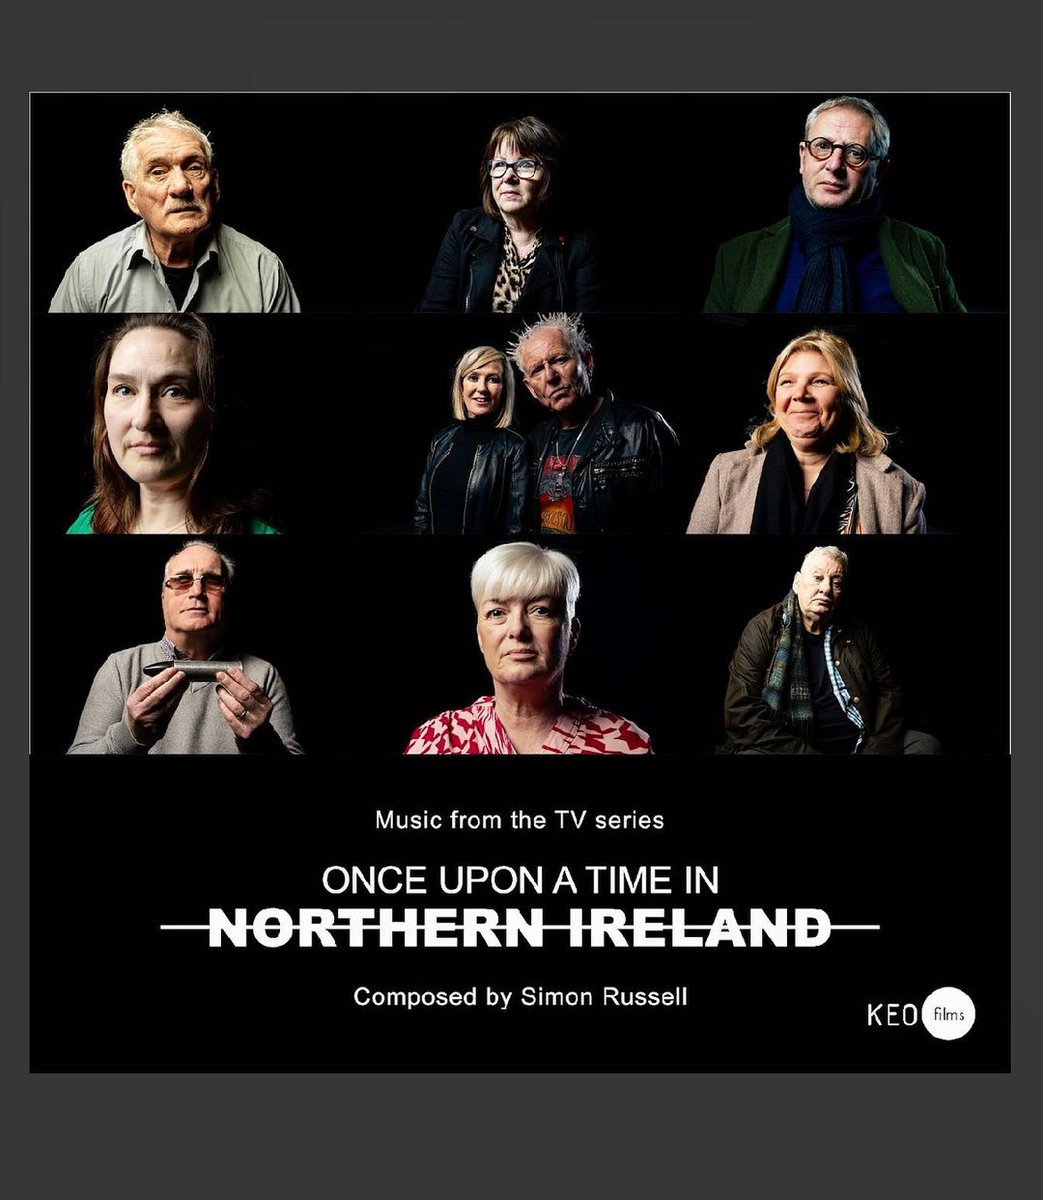 The final episode of ‘Once Upon a Time in Northern Ireland’ airs tonight on @BBCTwo. Directed by James Bluemel and music from @spraticus. 💿 The album is out now. open.spotify.com/album/7xSGMfTI… #accordermusic #onceuponatimeinnorthernireland #documentary